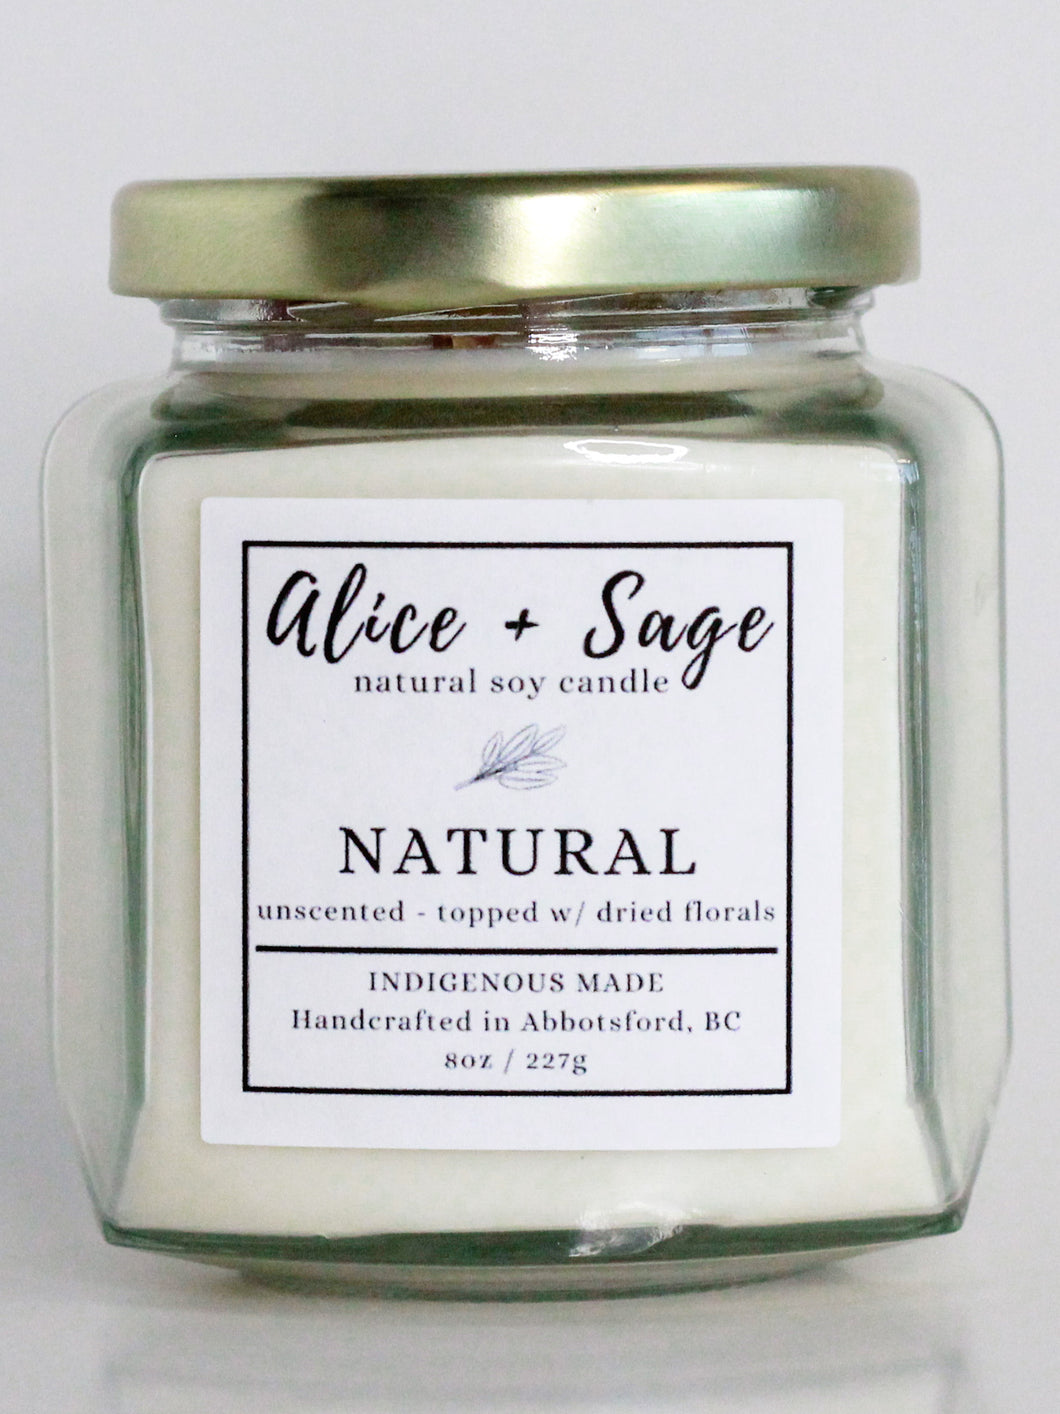 NATURAL (UNSCENTED)